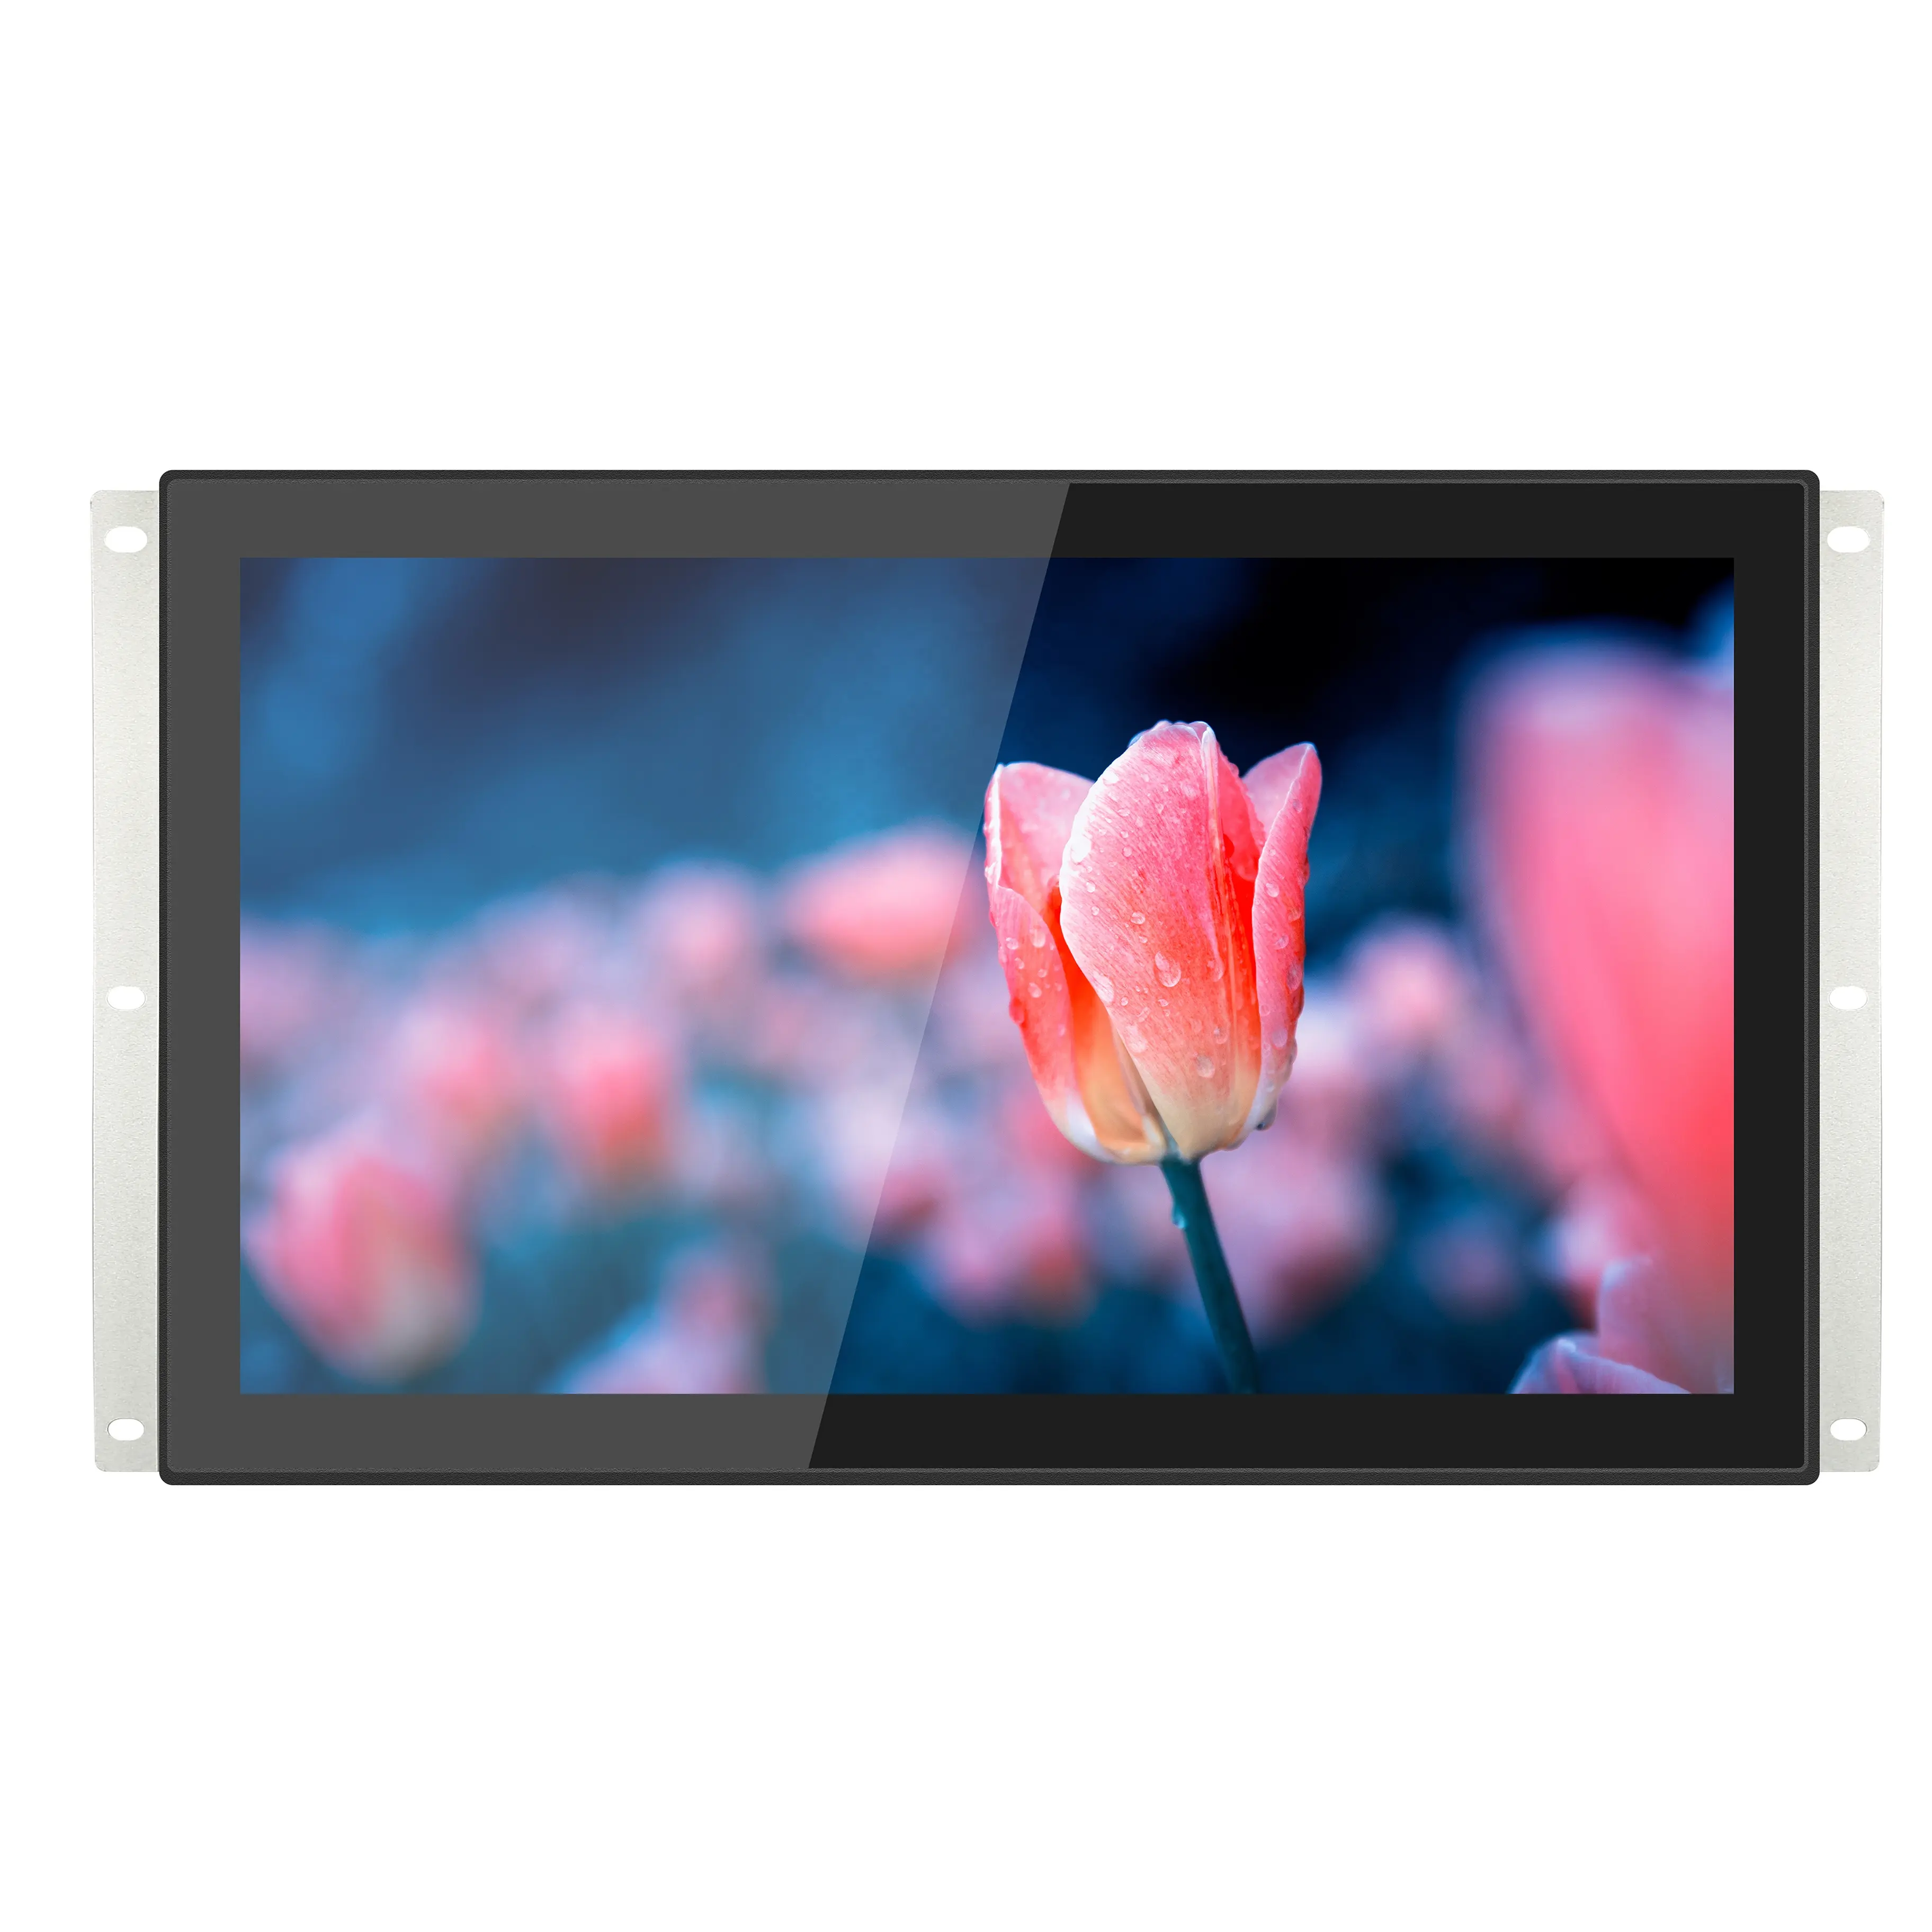 New On Sale 18.5'' 13.3'' 15.6'' 21.5'' Open Frame Capacitive Touch LCD Flat Screen Monitor Industrial Display With VGA HDMI DVI